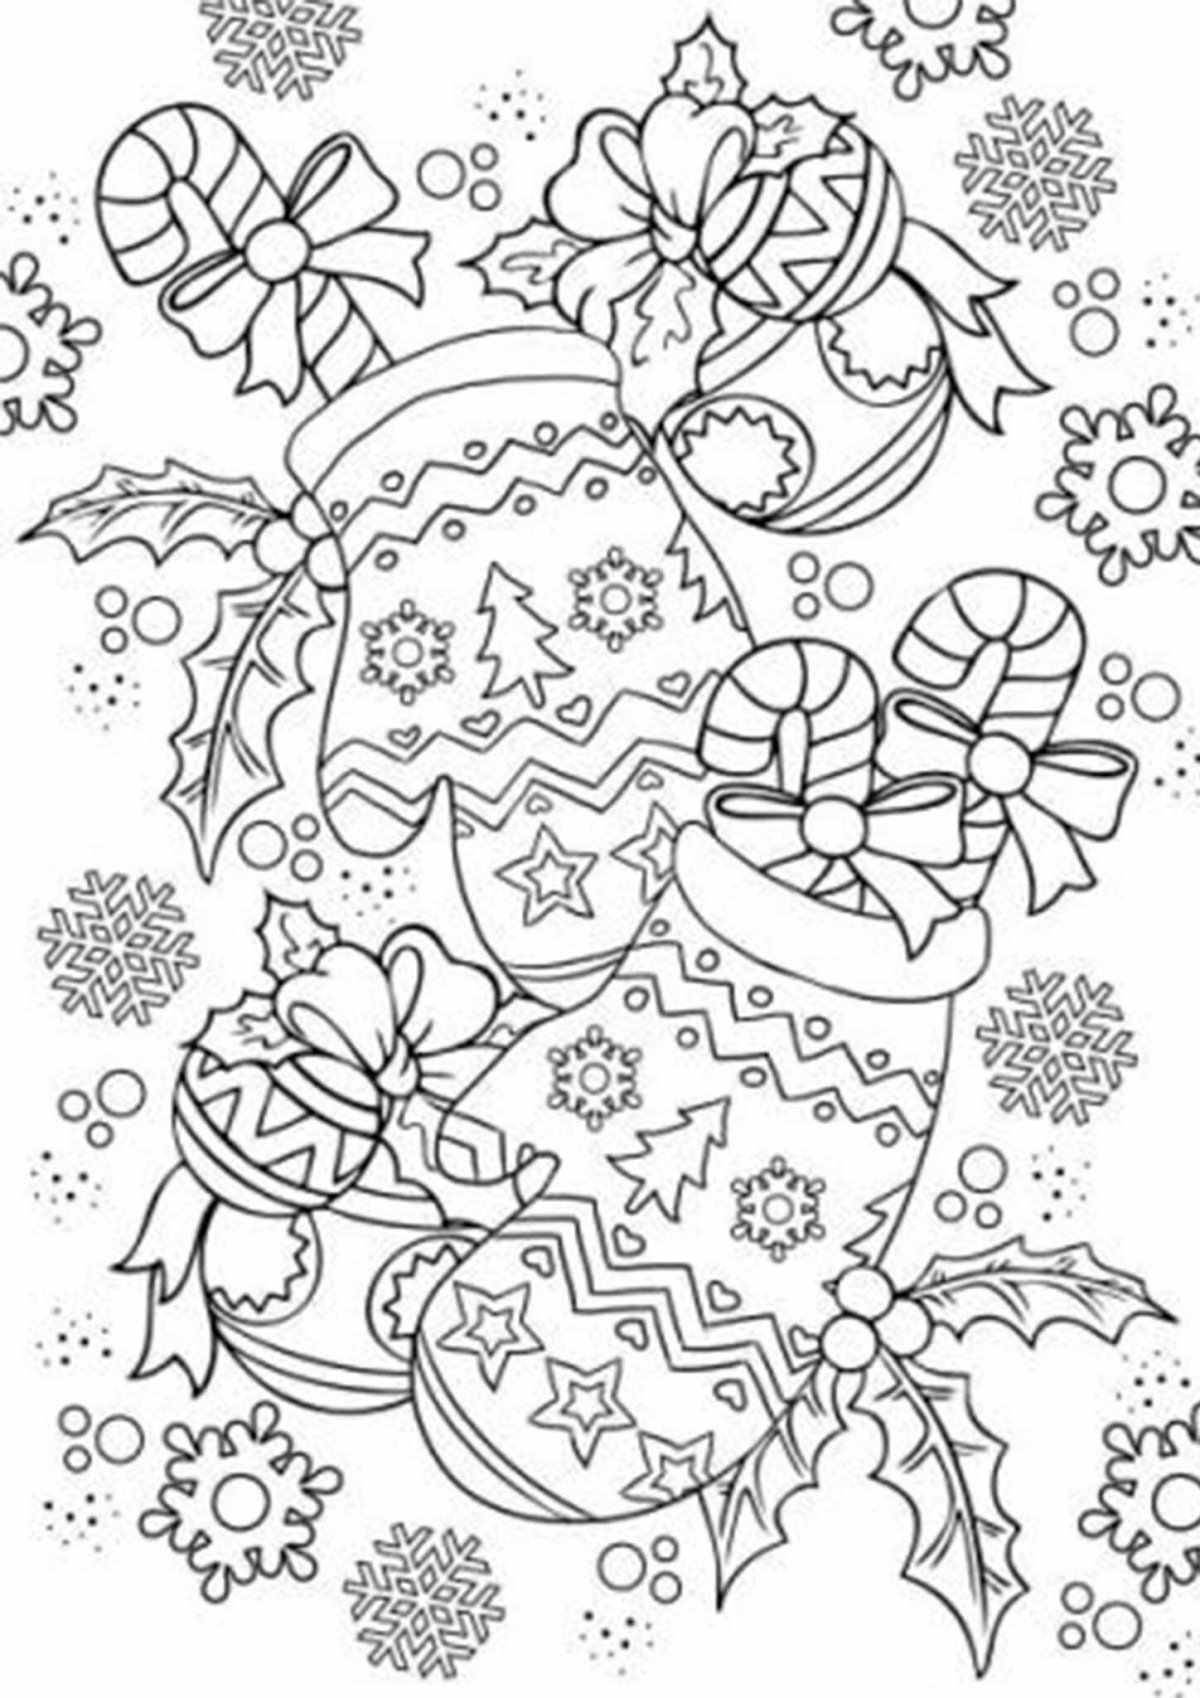 Magical New Year's anti-stress coloring book